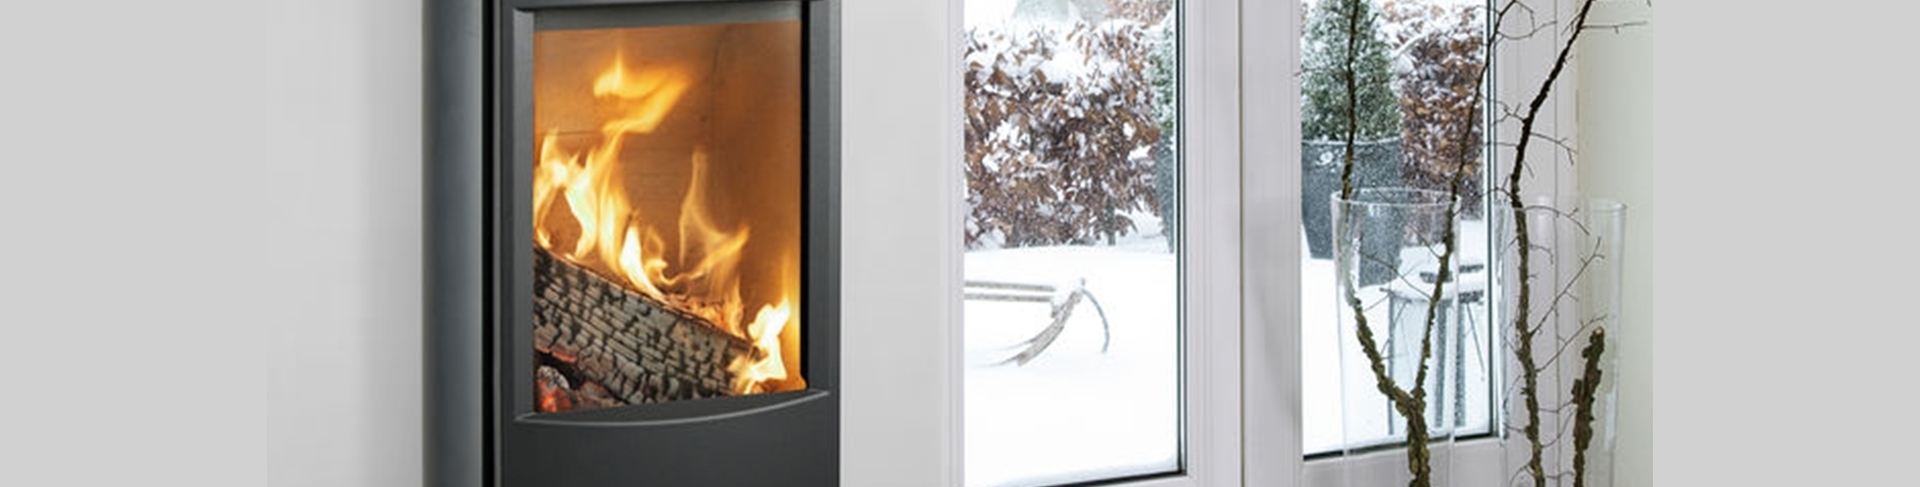 Gas Fireplace Glass Doors Open or Closed New the London Fireplaces